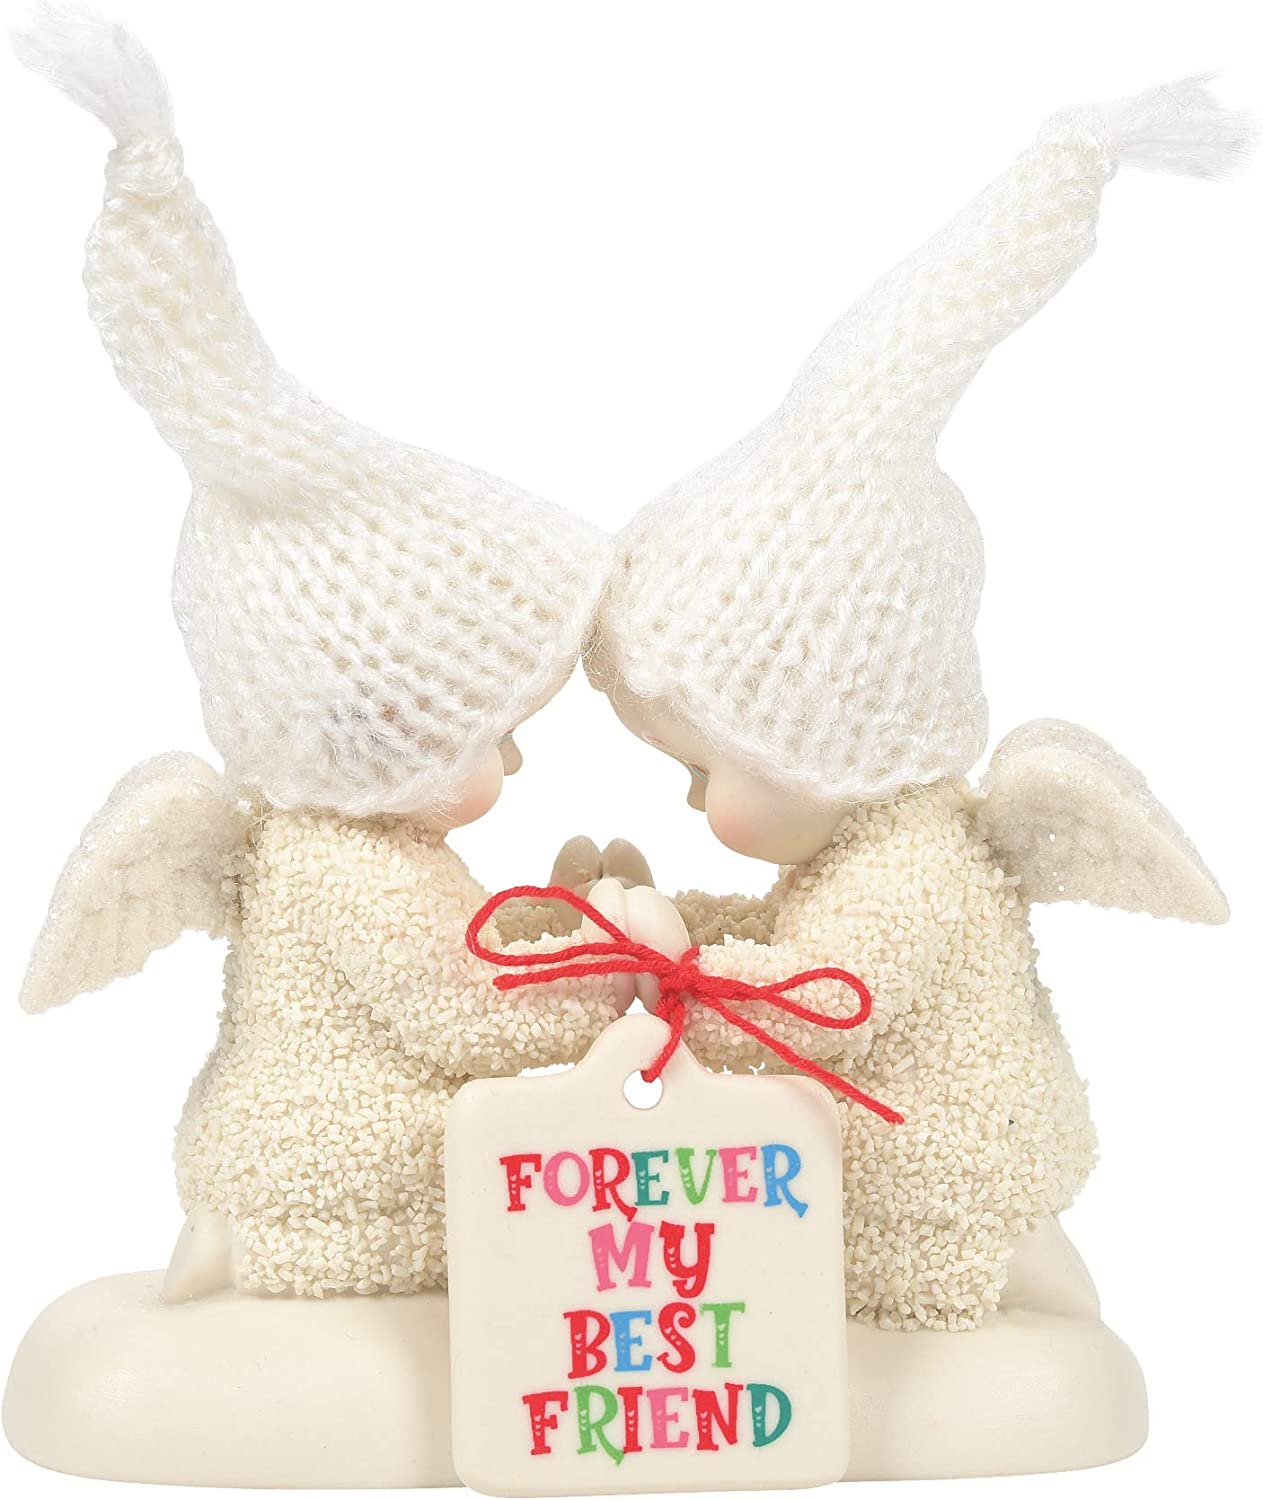 Department 56 Snowbabies Awesome Forever Best Friends Figurine